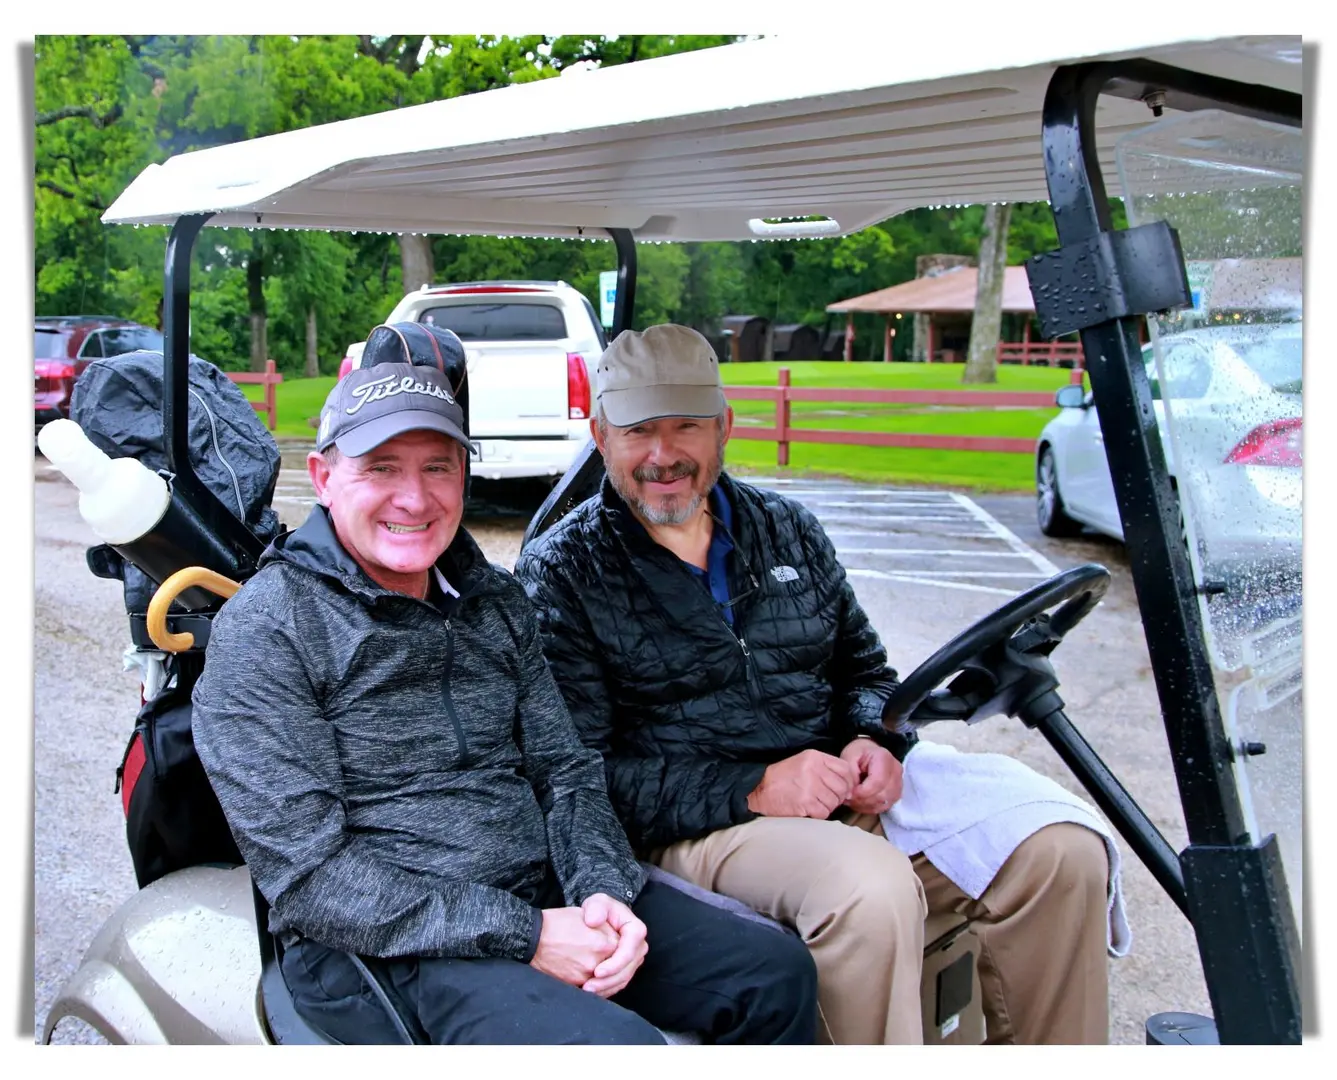 Two men sitting in a golf cart on a rainy day.